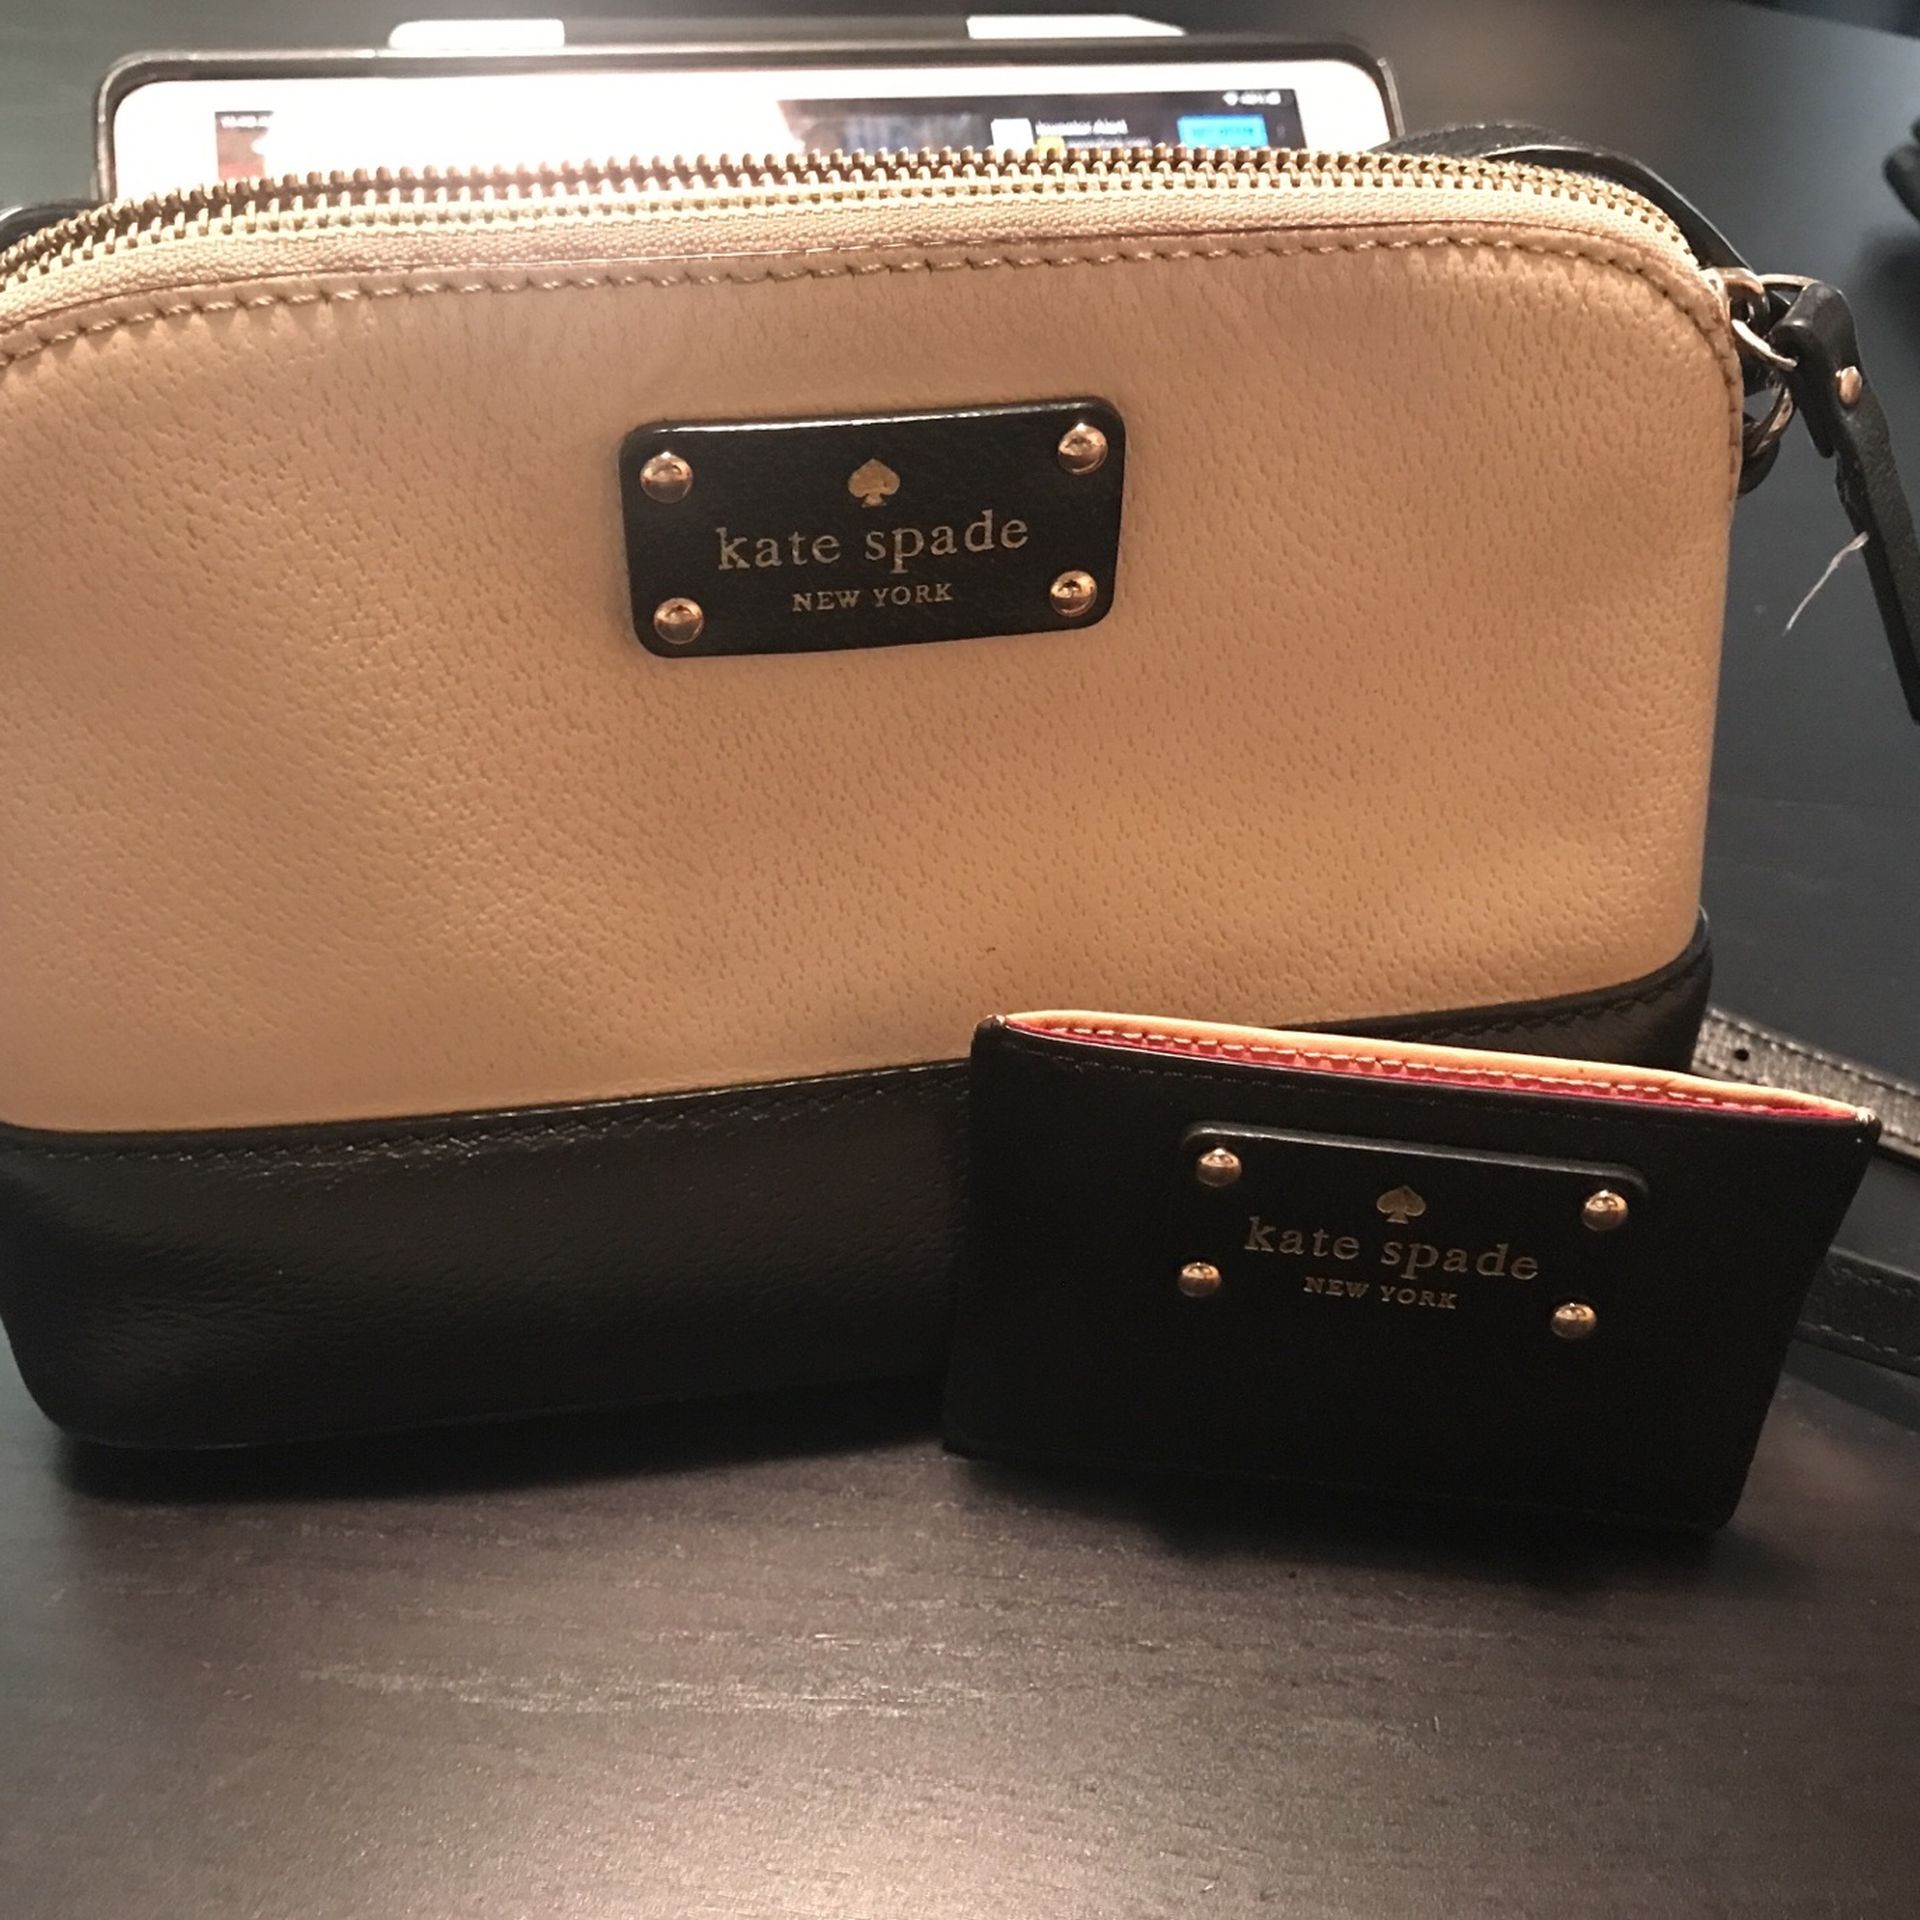 Kate spade Purse With Wallet Like New